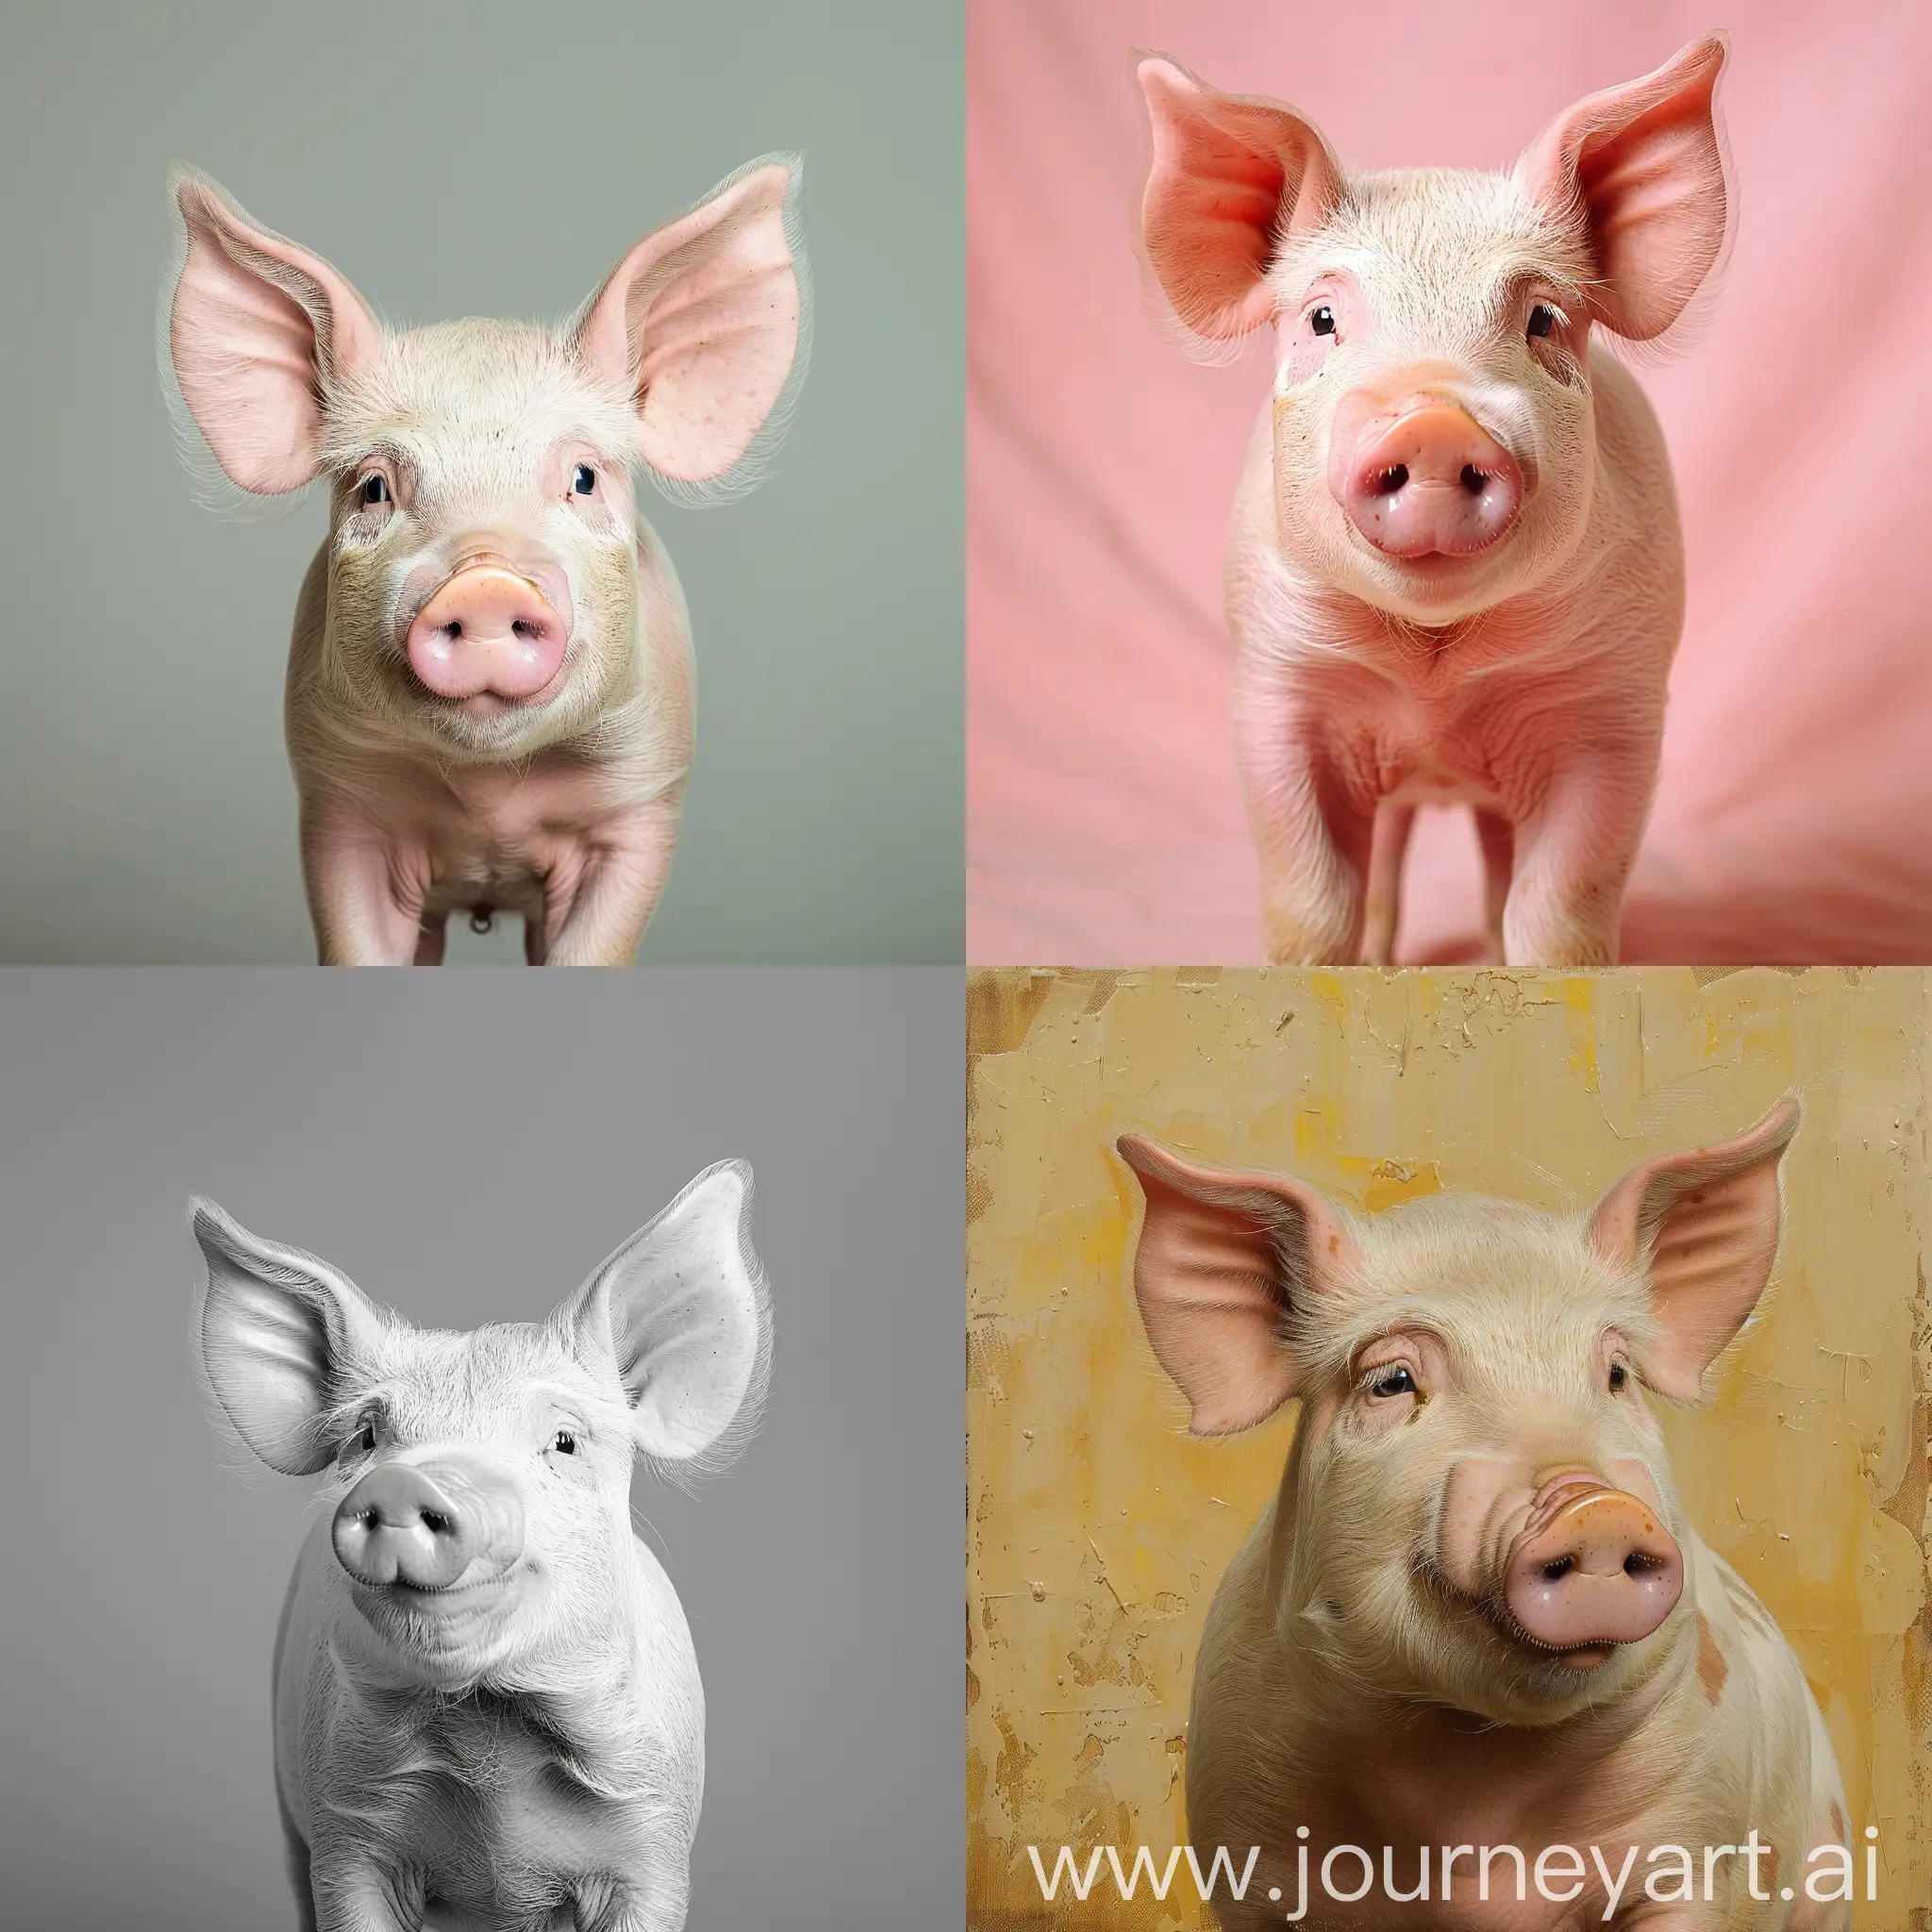 Adorable-Pig-Portrait-Cute-Pink-Piggy-in-a-Natural-Setting